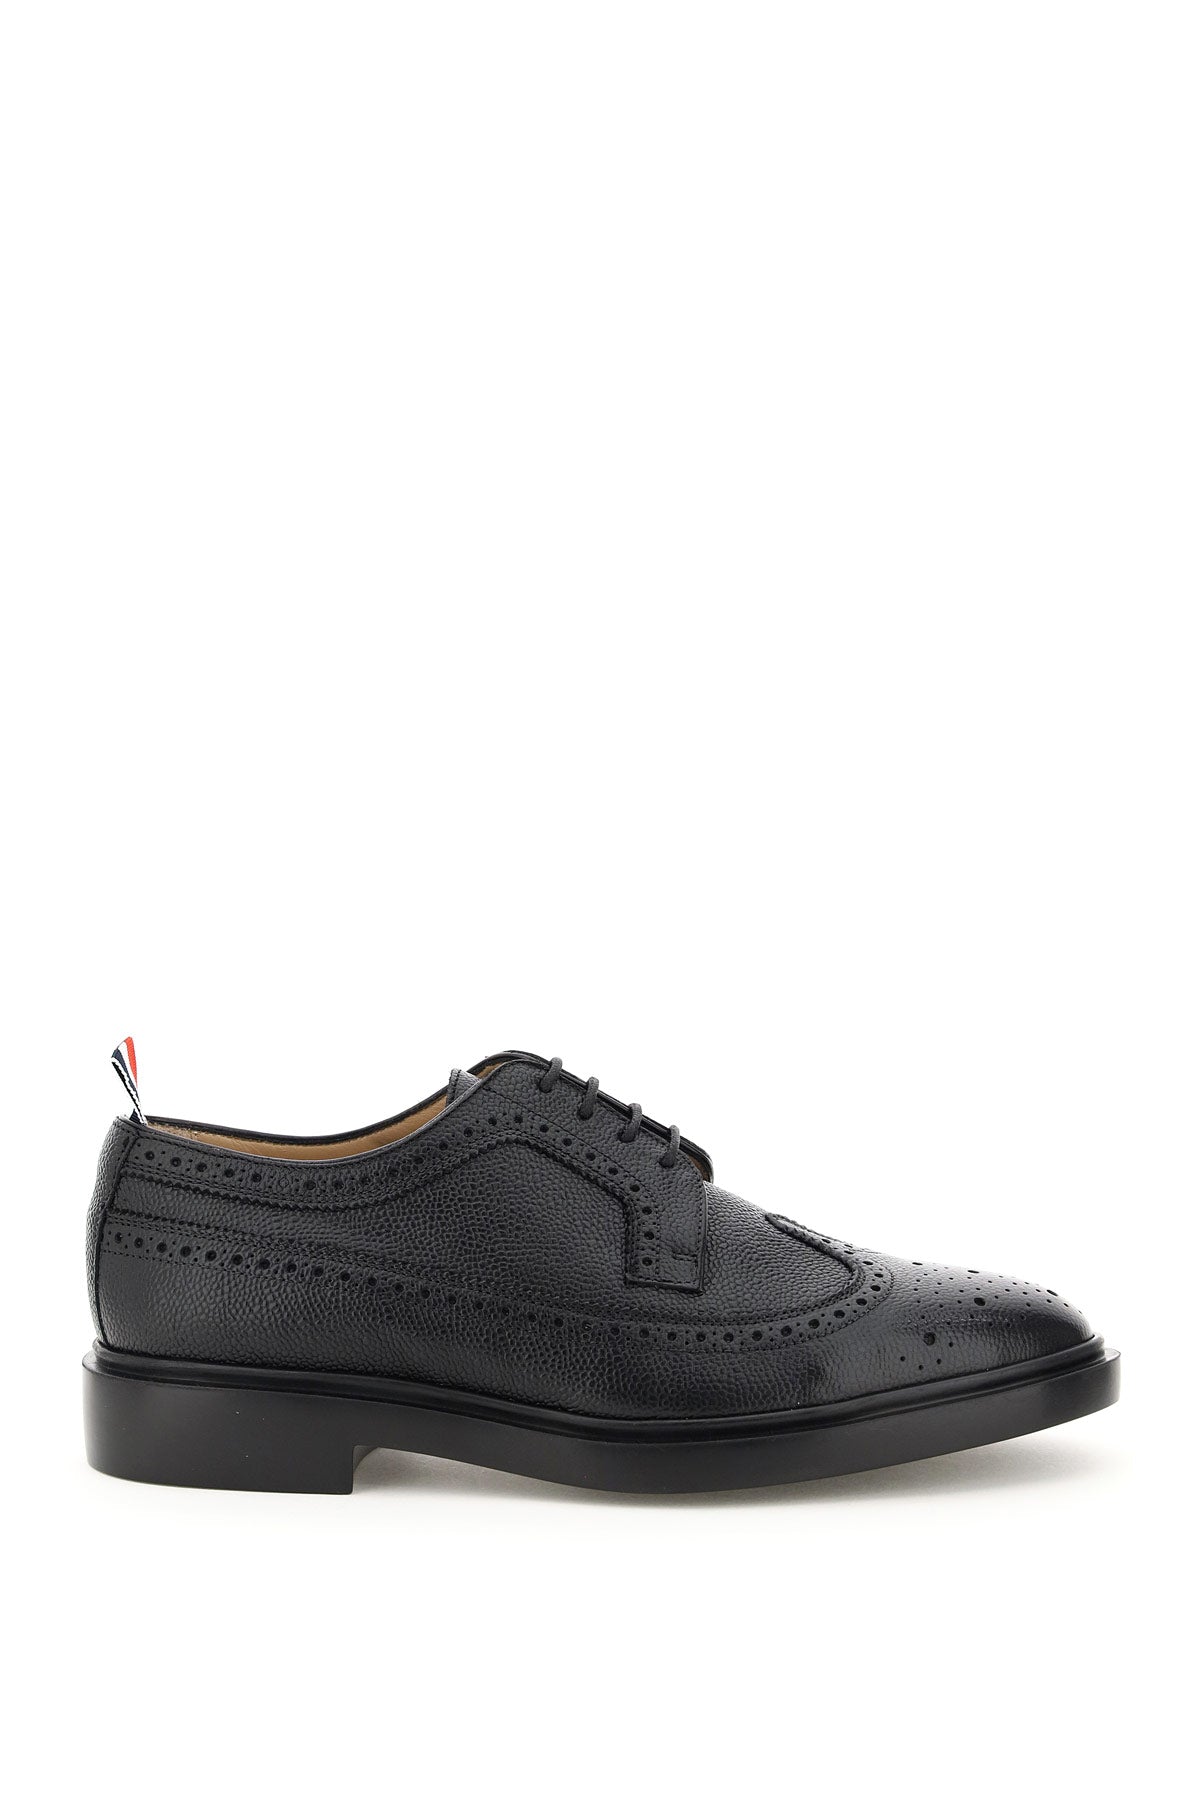 Thom browne longwing brogue lace-up shoes-0